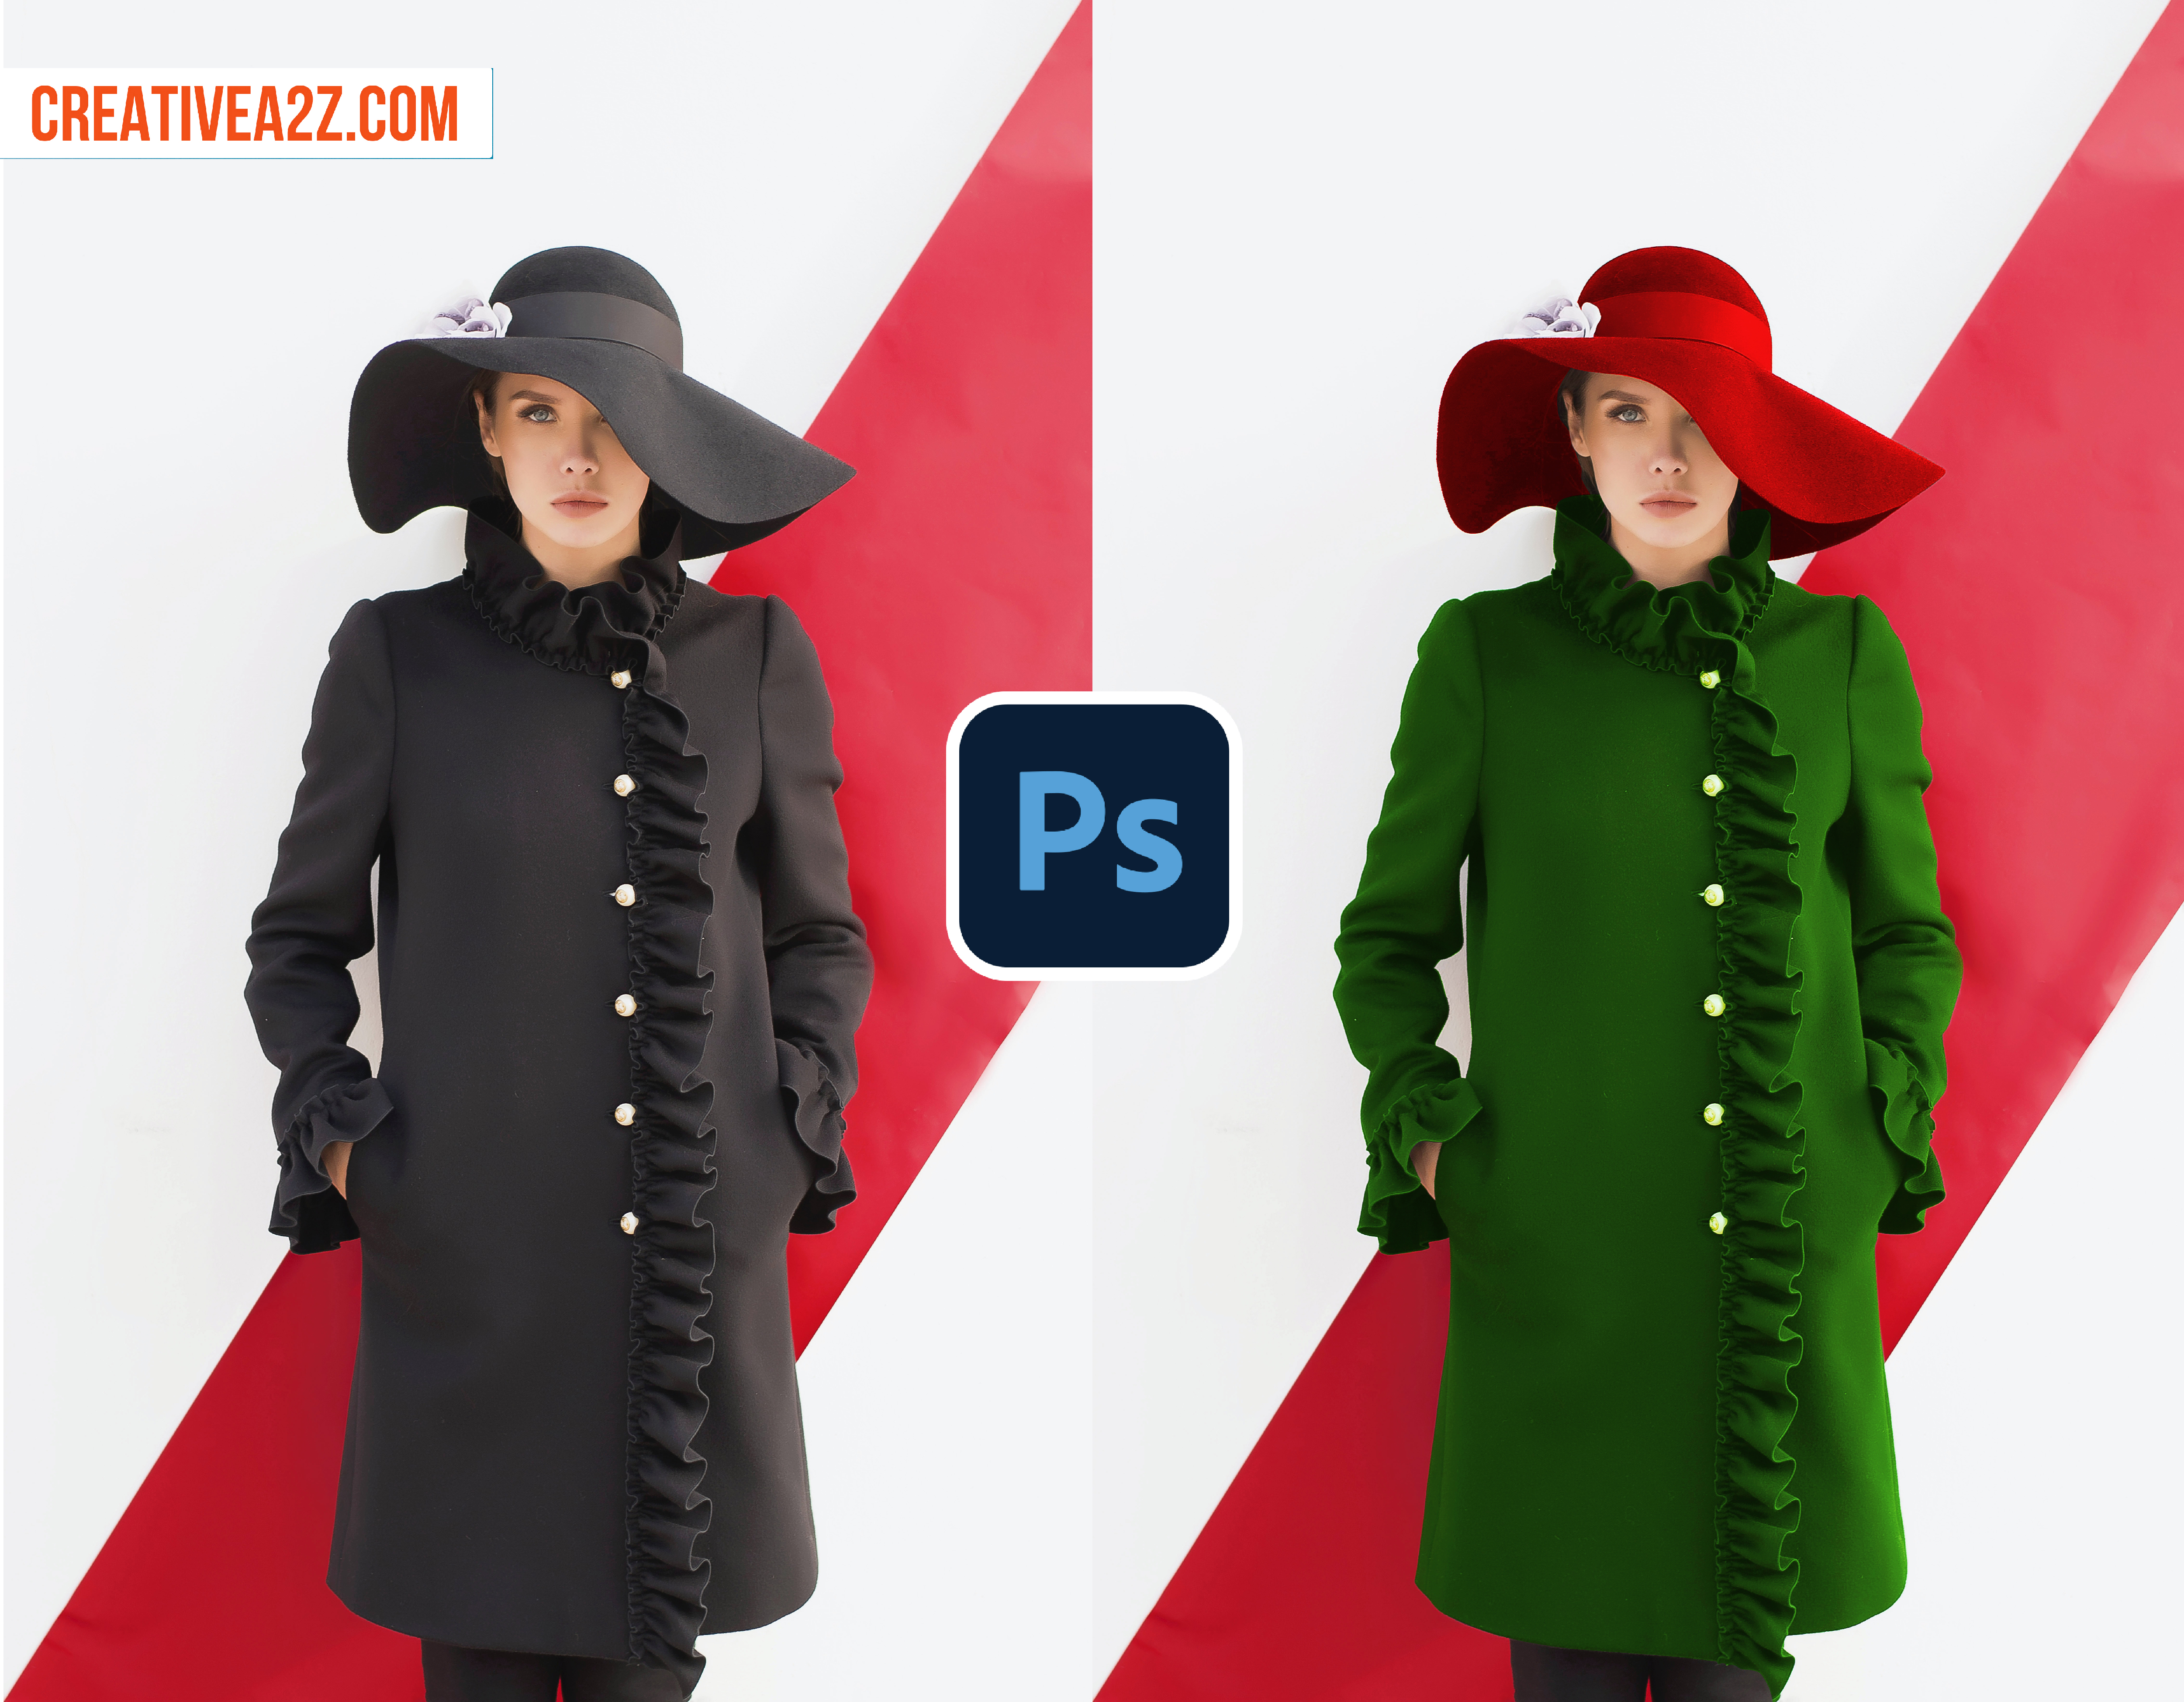 Quickly change the clothing color in photoshop(creativea2z)